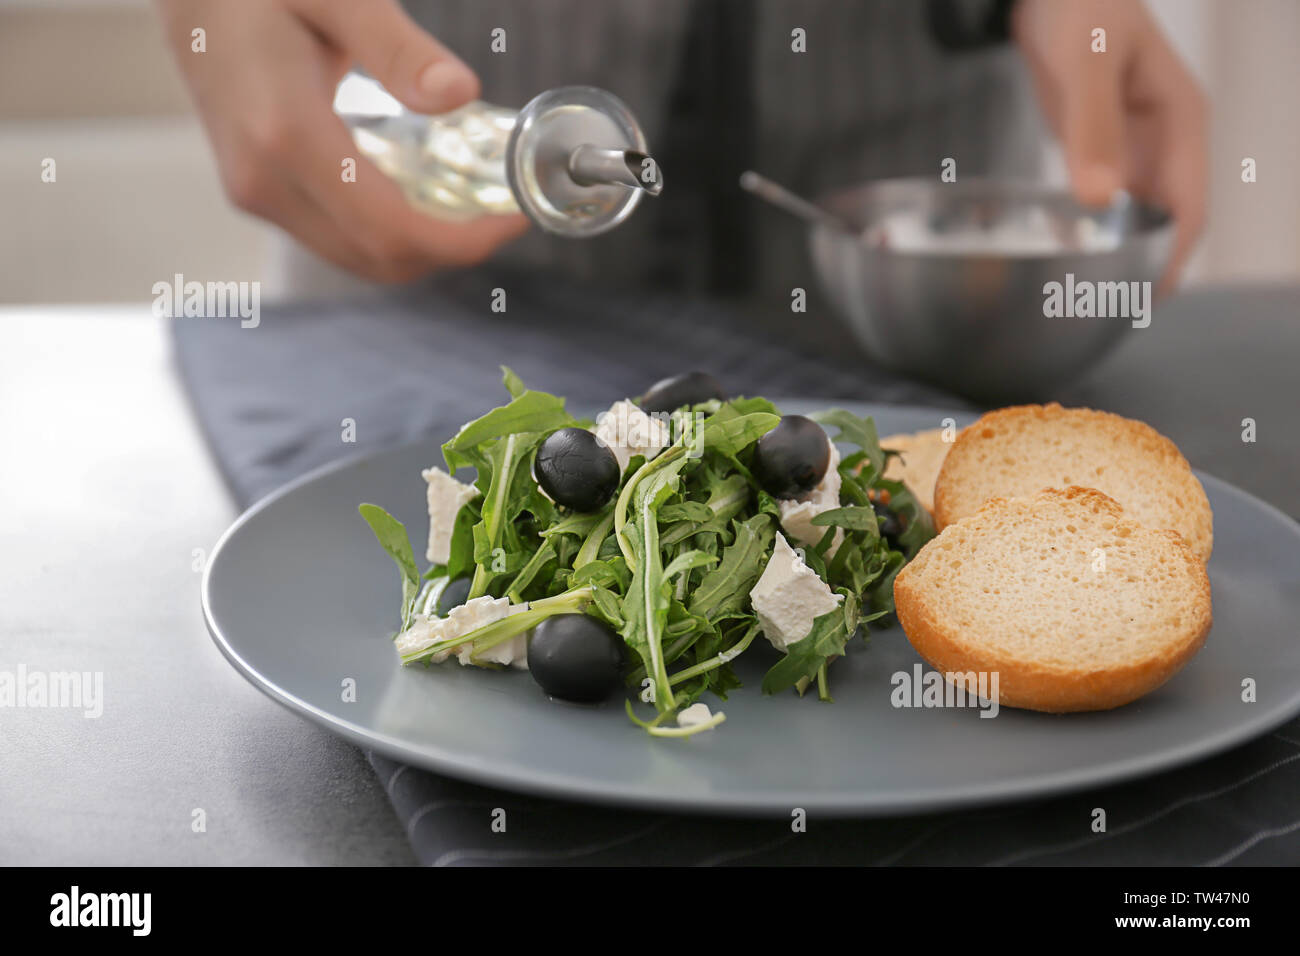 Woman dressing fresh vegetable salad with arugula leaves and olives ...